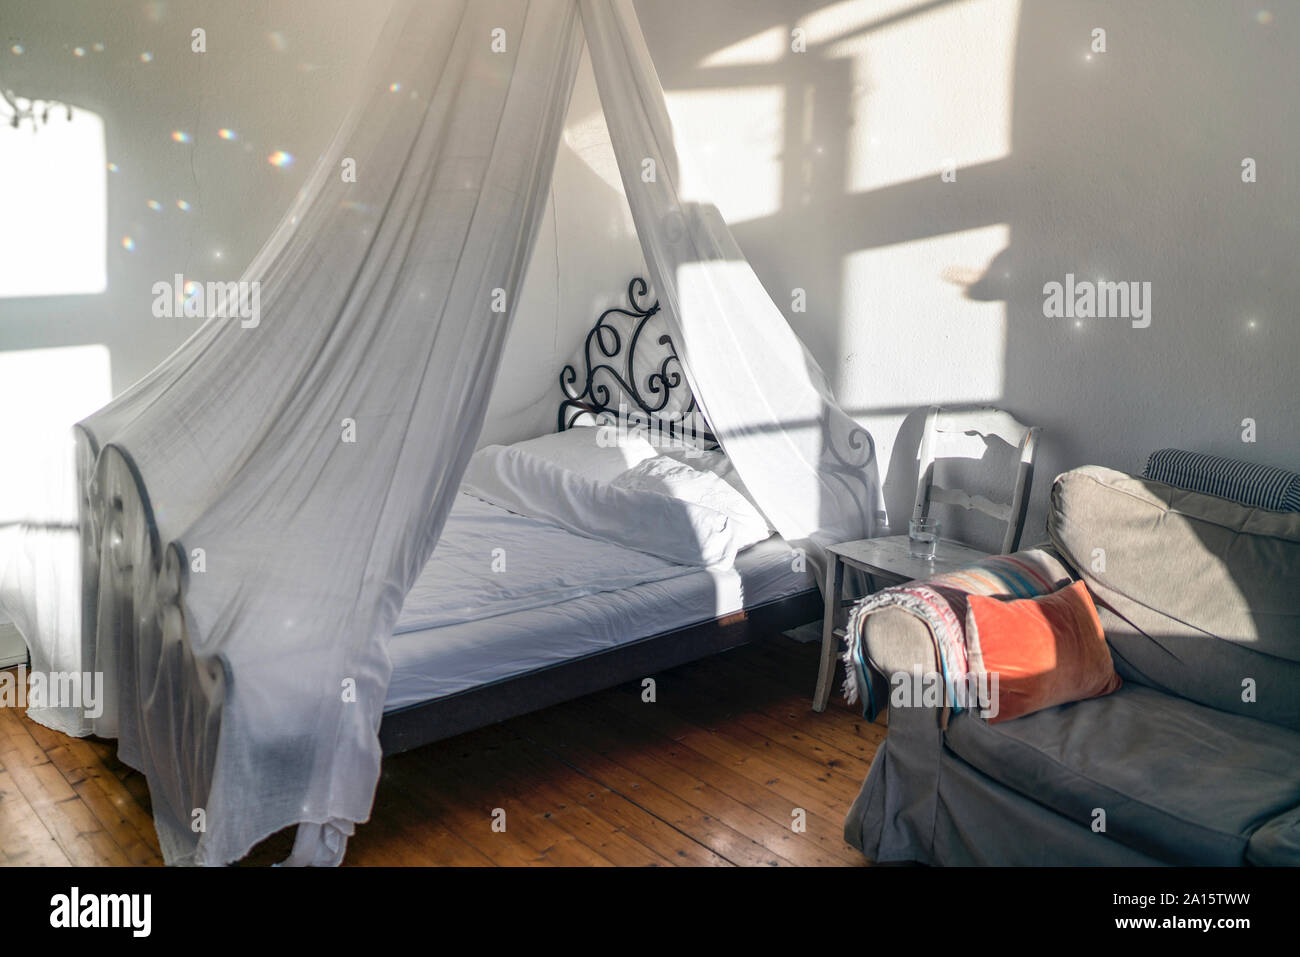 Domestic room with canopy bed and couch Stock Photo